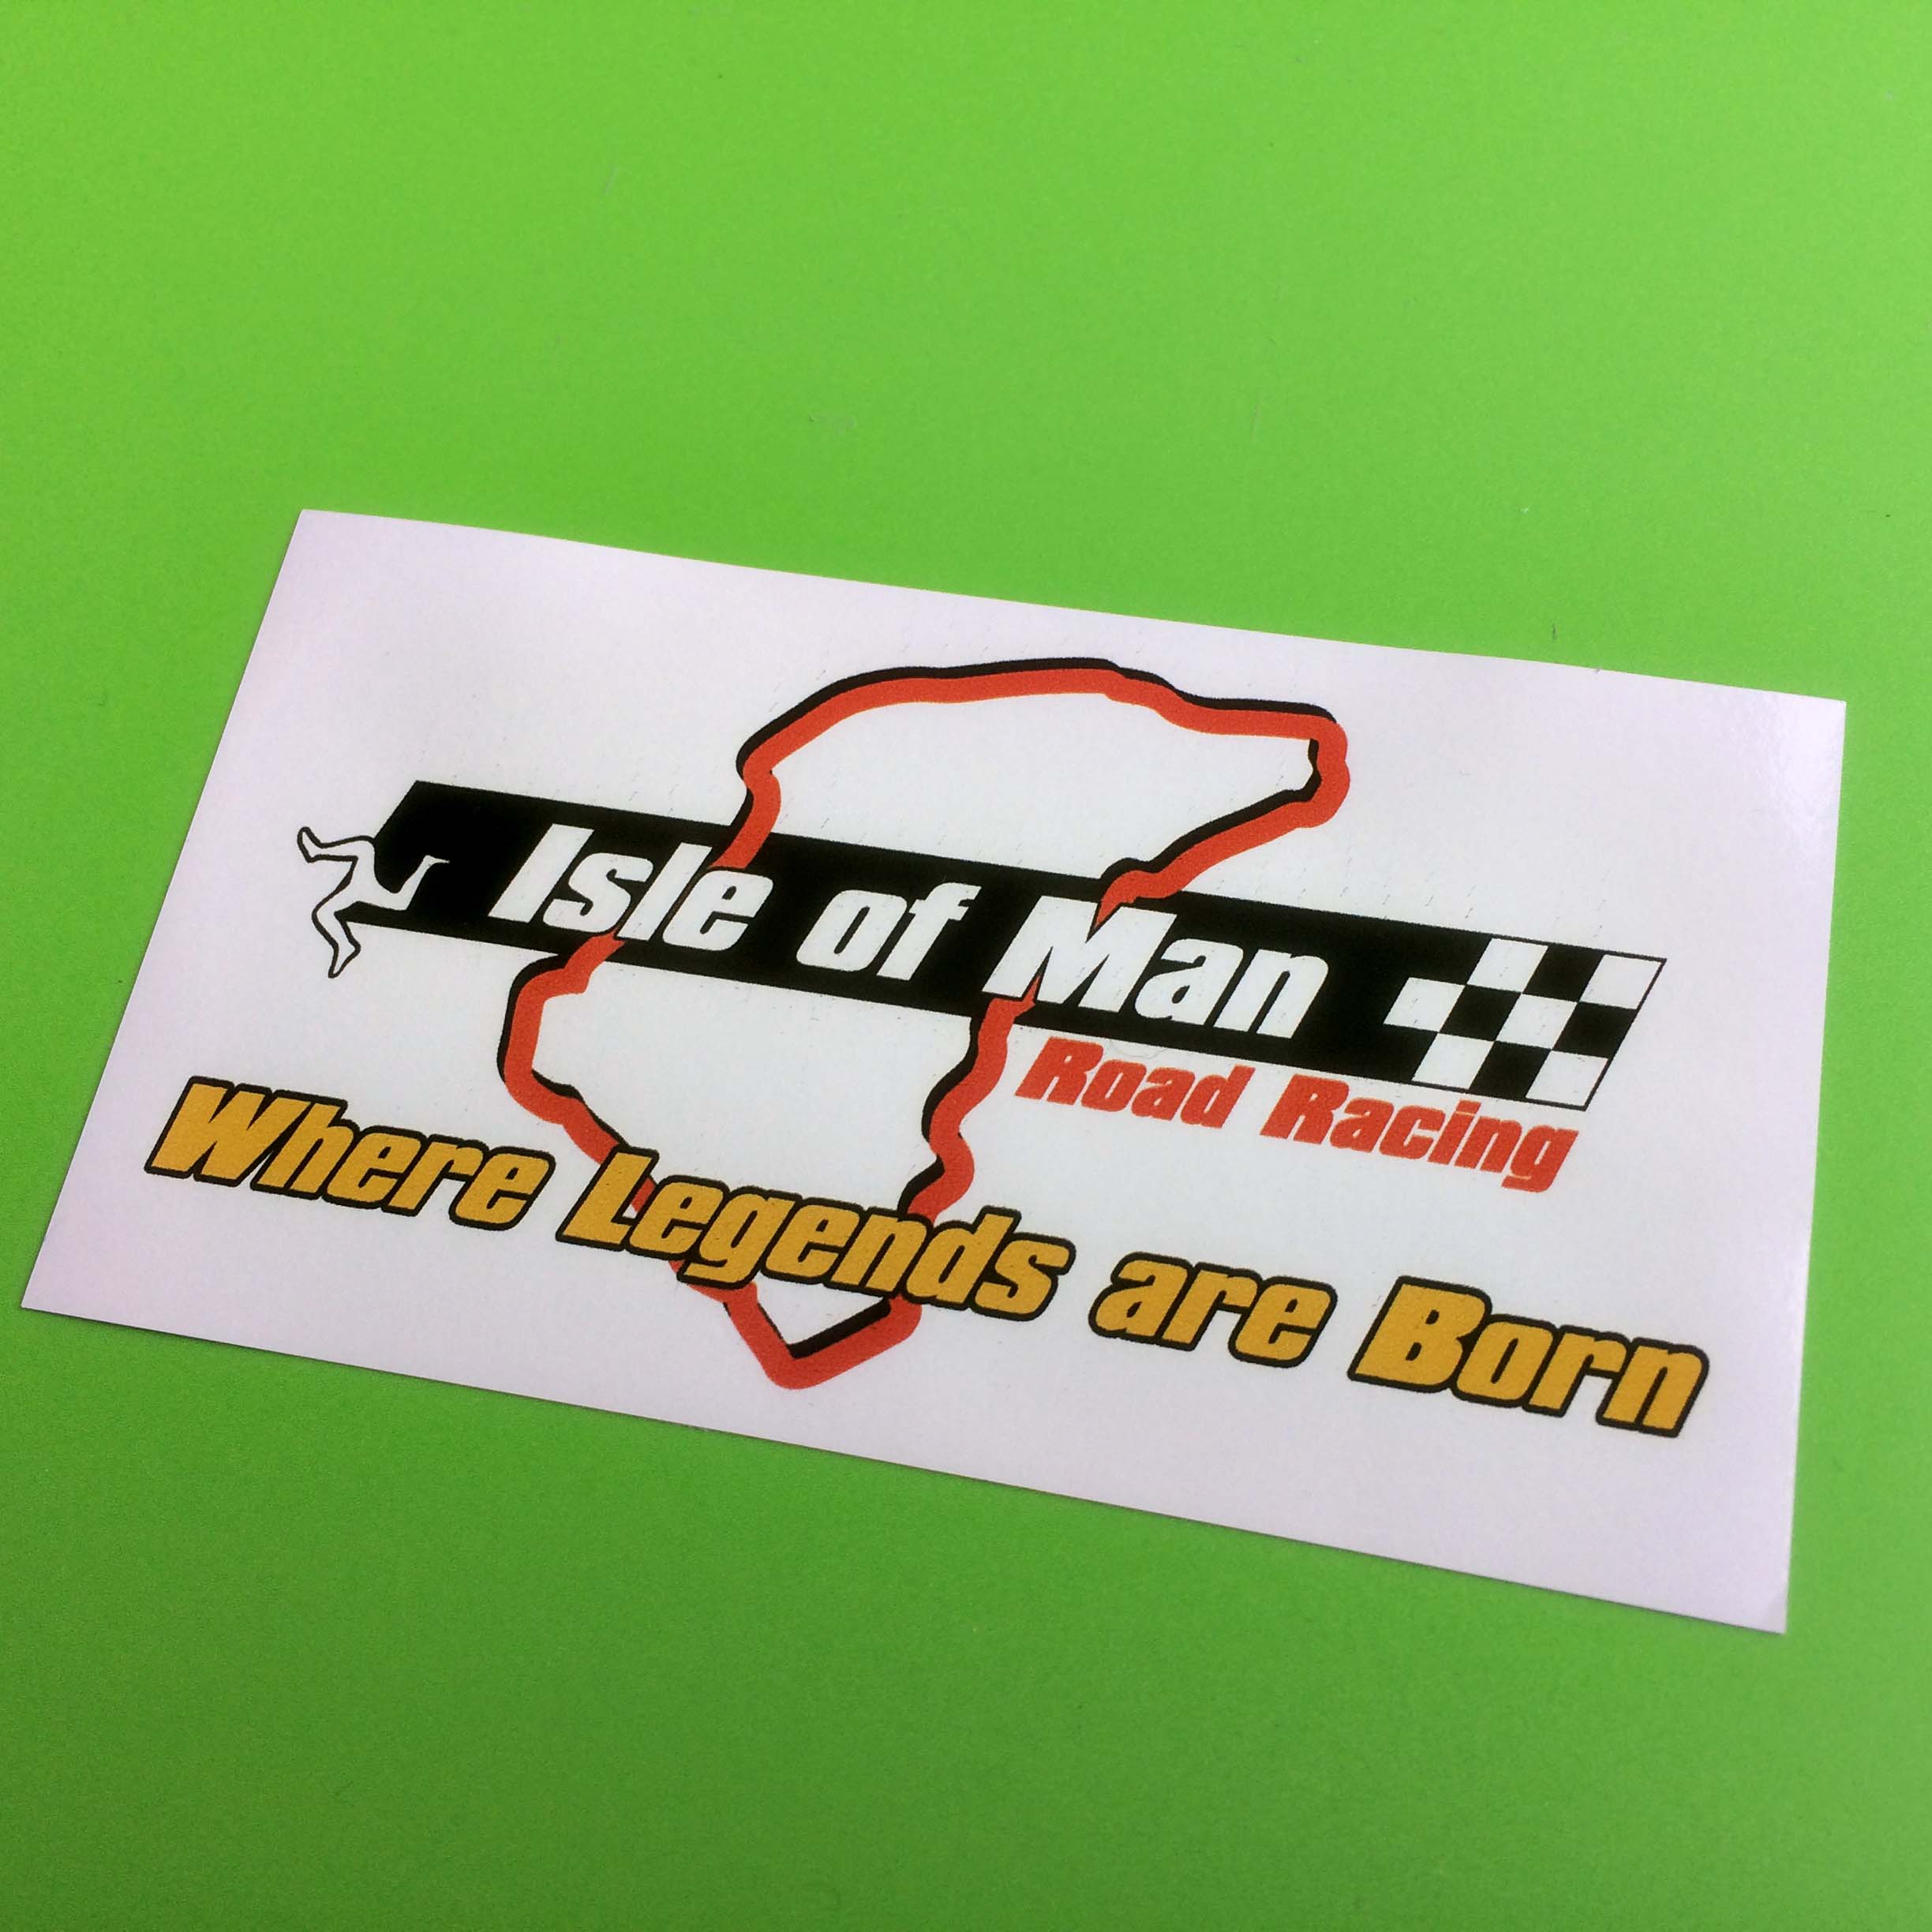 ISLE OF MAN ROAD RACING STICKER. Isle of Man in white lettering, a chequered flag and a white triskelion on a black banner. Below are Road Racing in red and Where Legends are Born in yellow lettering. A red contour of the race circuit is in the background.